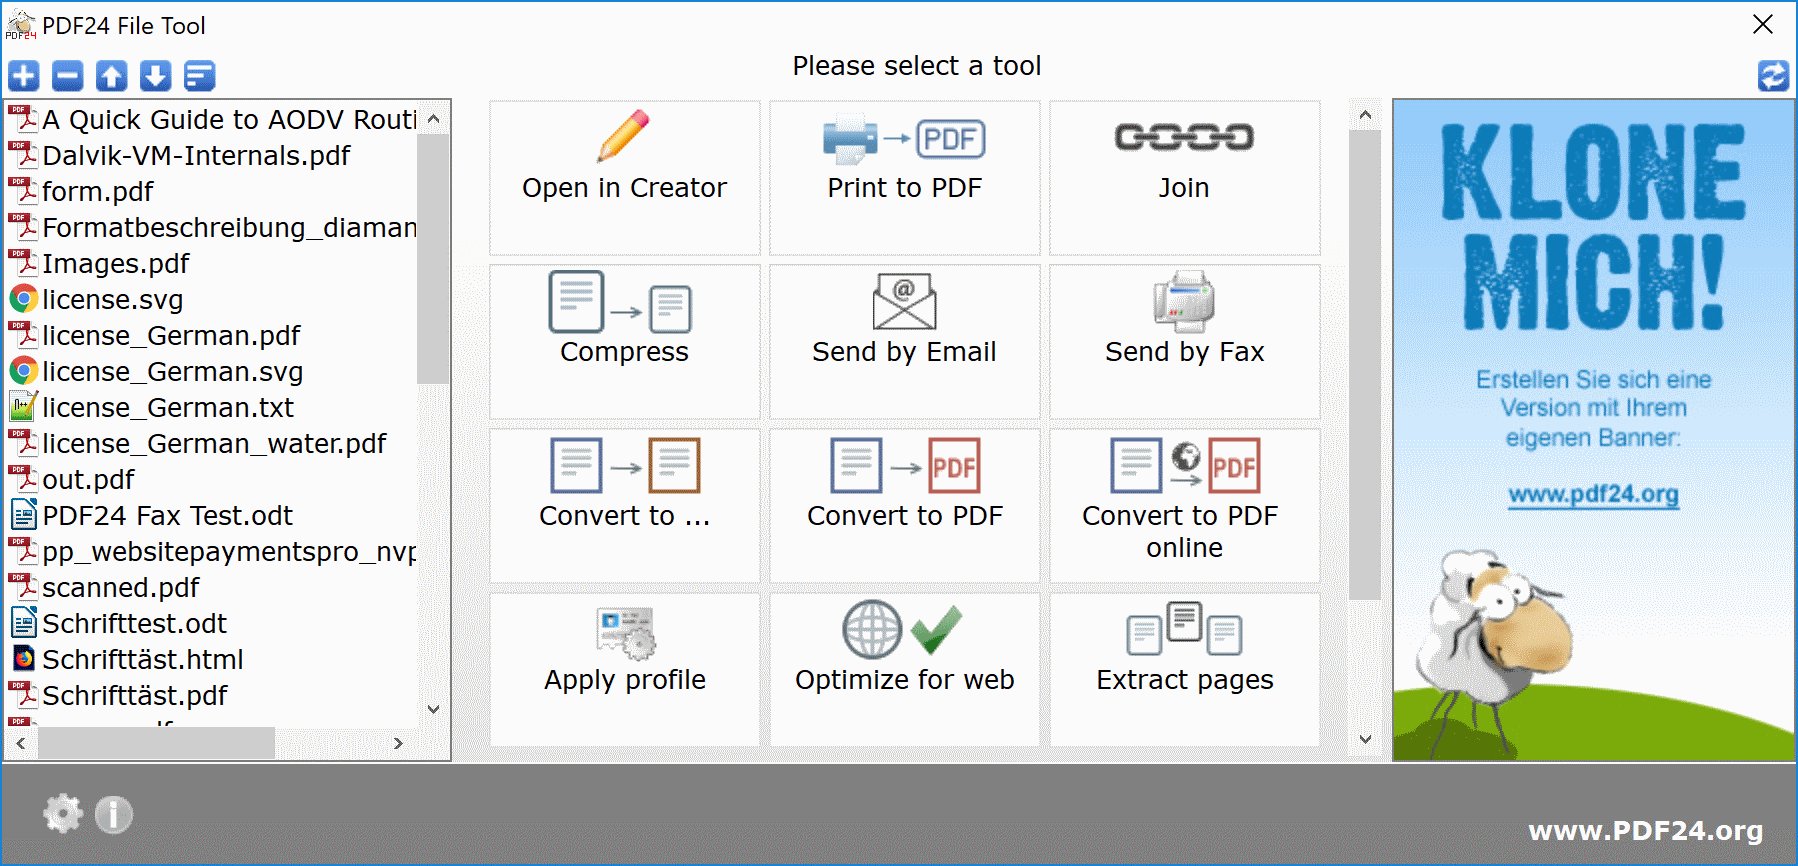 download the new for windows PDF24 Creator 11.13.1